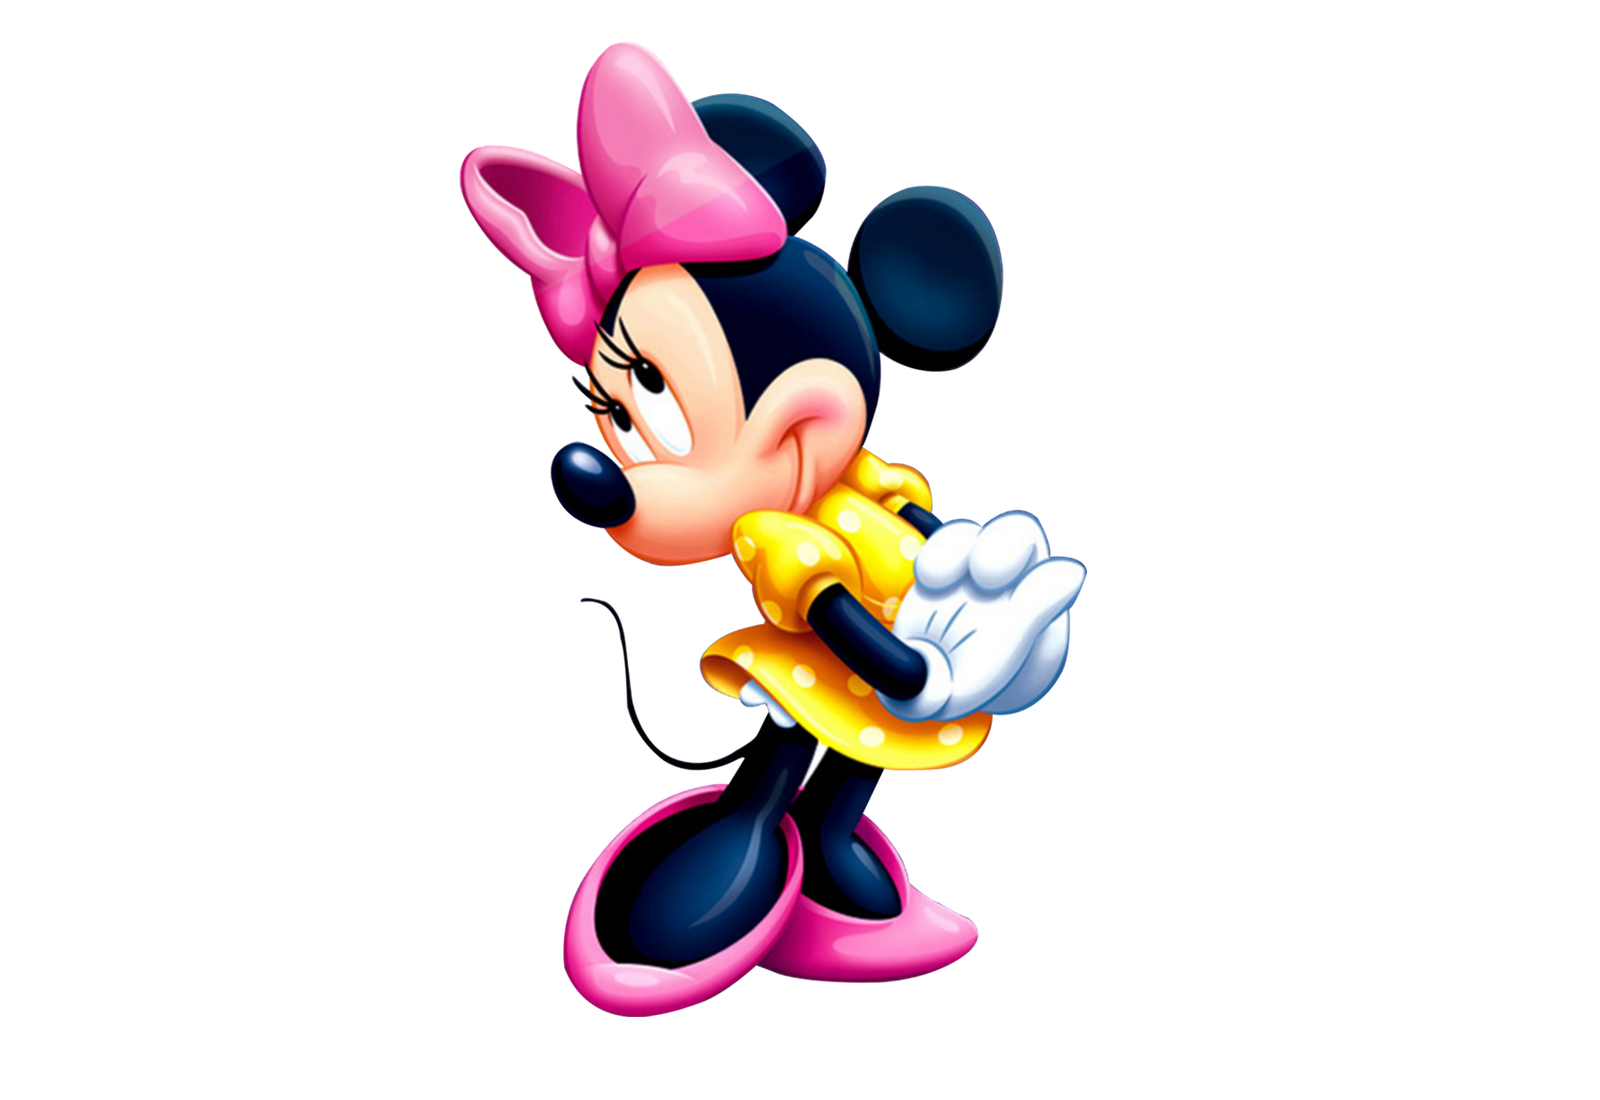 Download PNG image - Minnie Mouse Transparent Background 